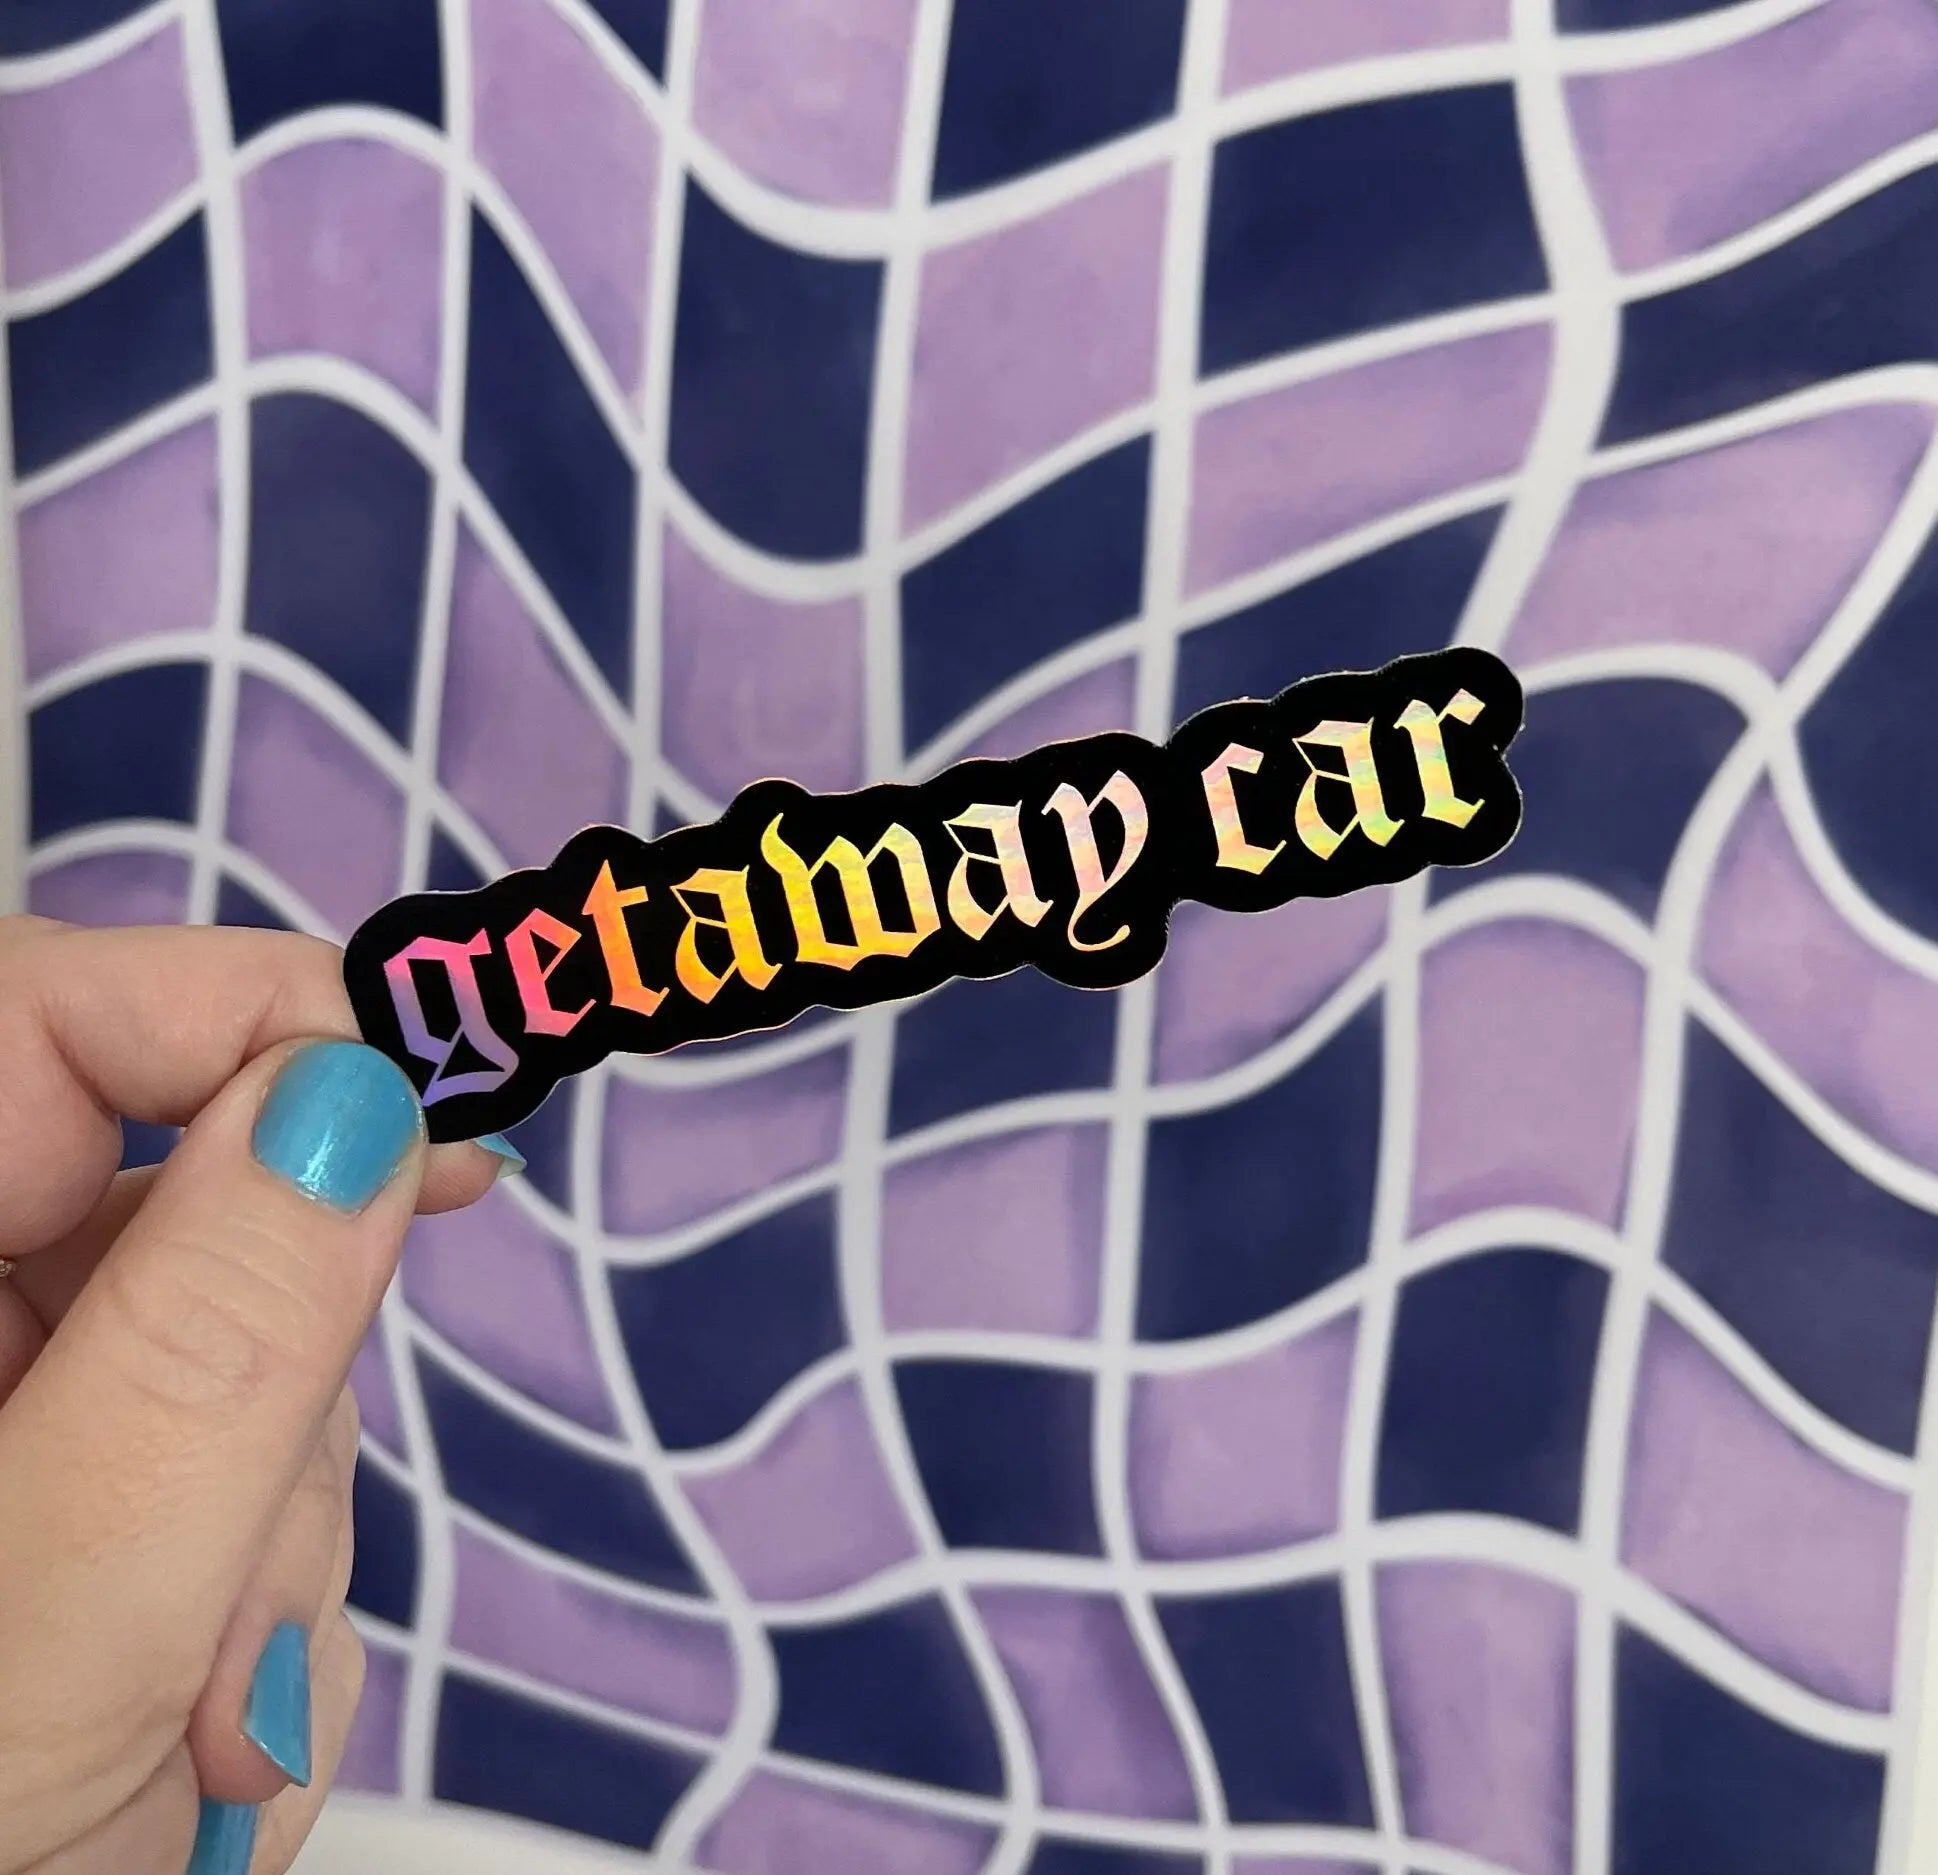 Getaway Car holographic sticker MangoIllustrated